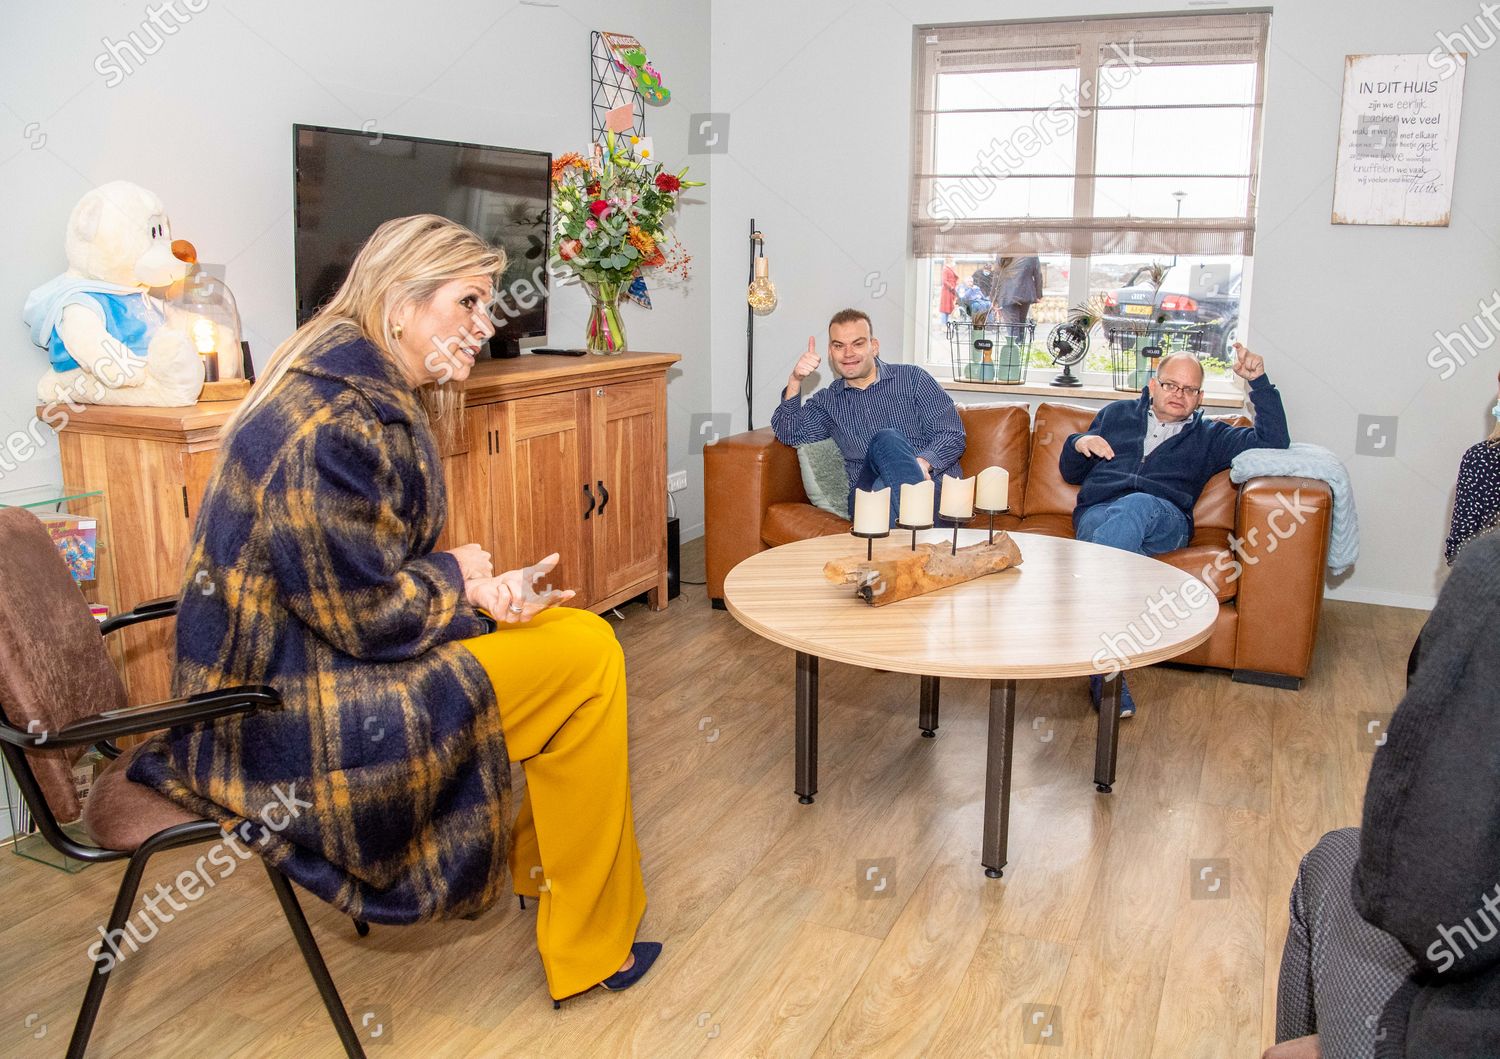 queen-maxima-visits-a-residential-care-location-noordwijk-the-netherlands-shutterstock-editorial-11014774h.jpg